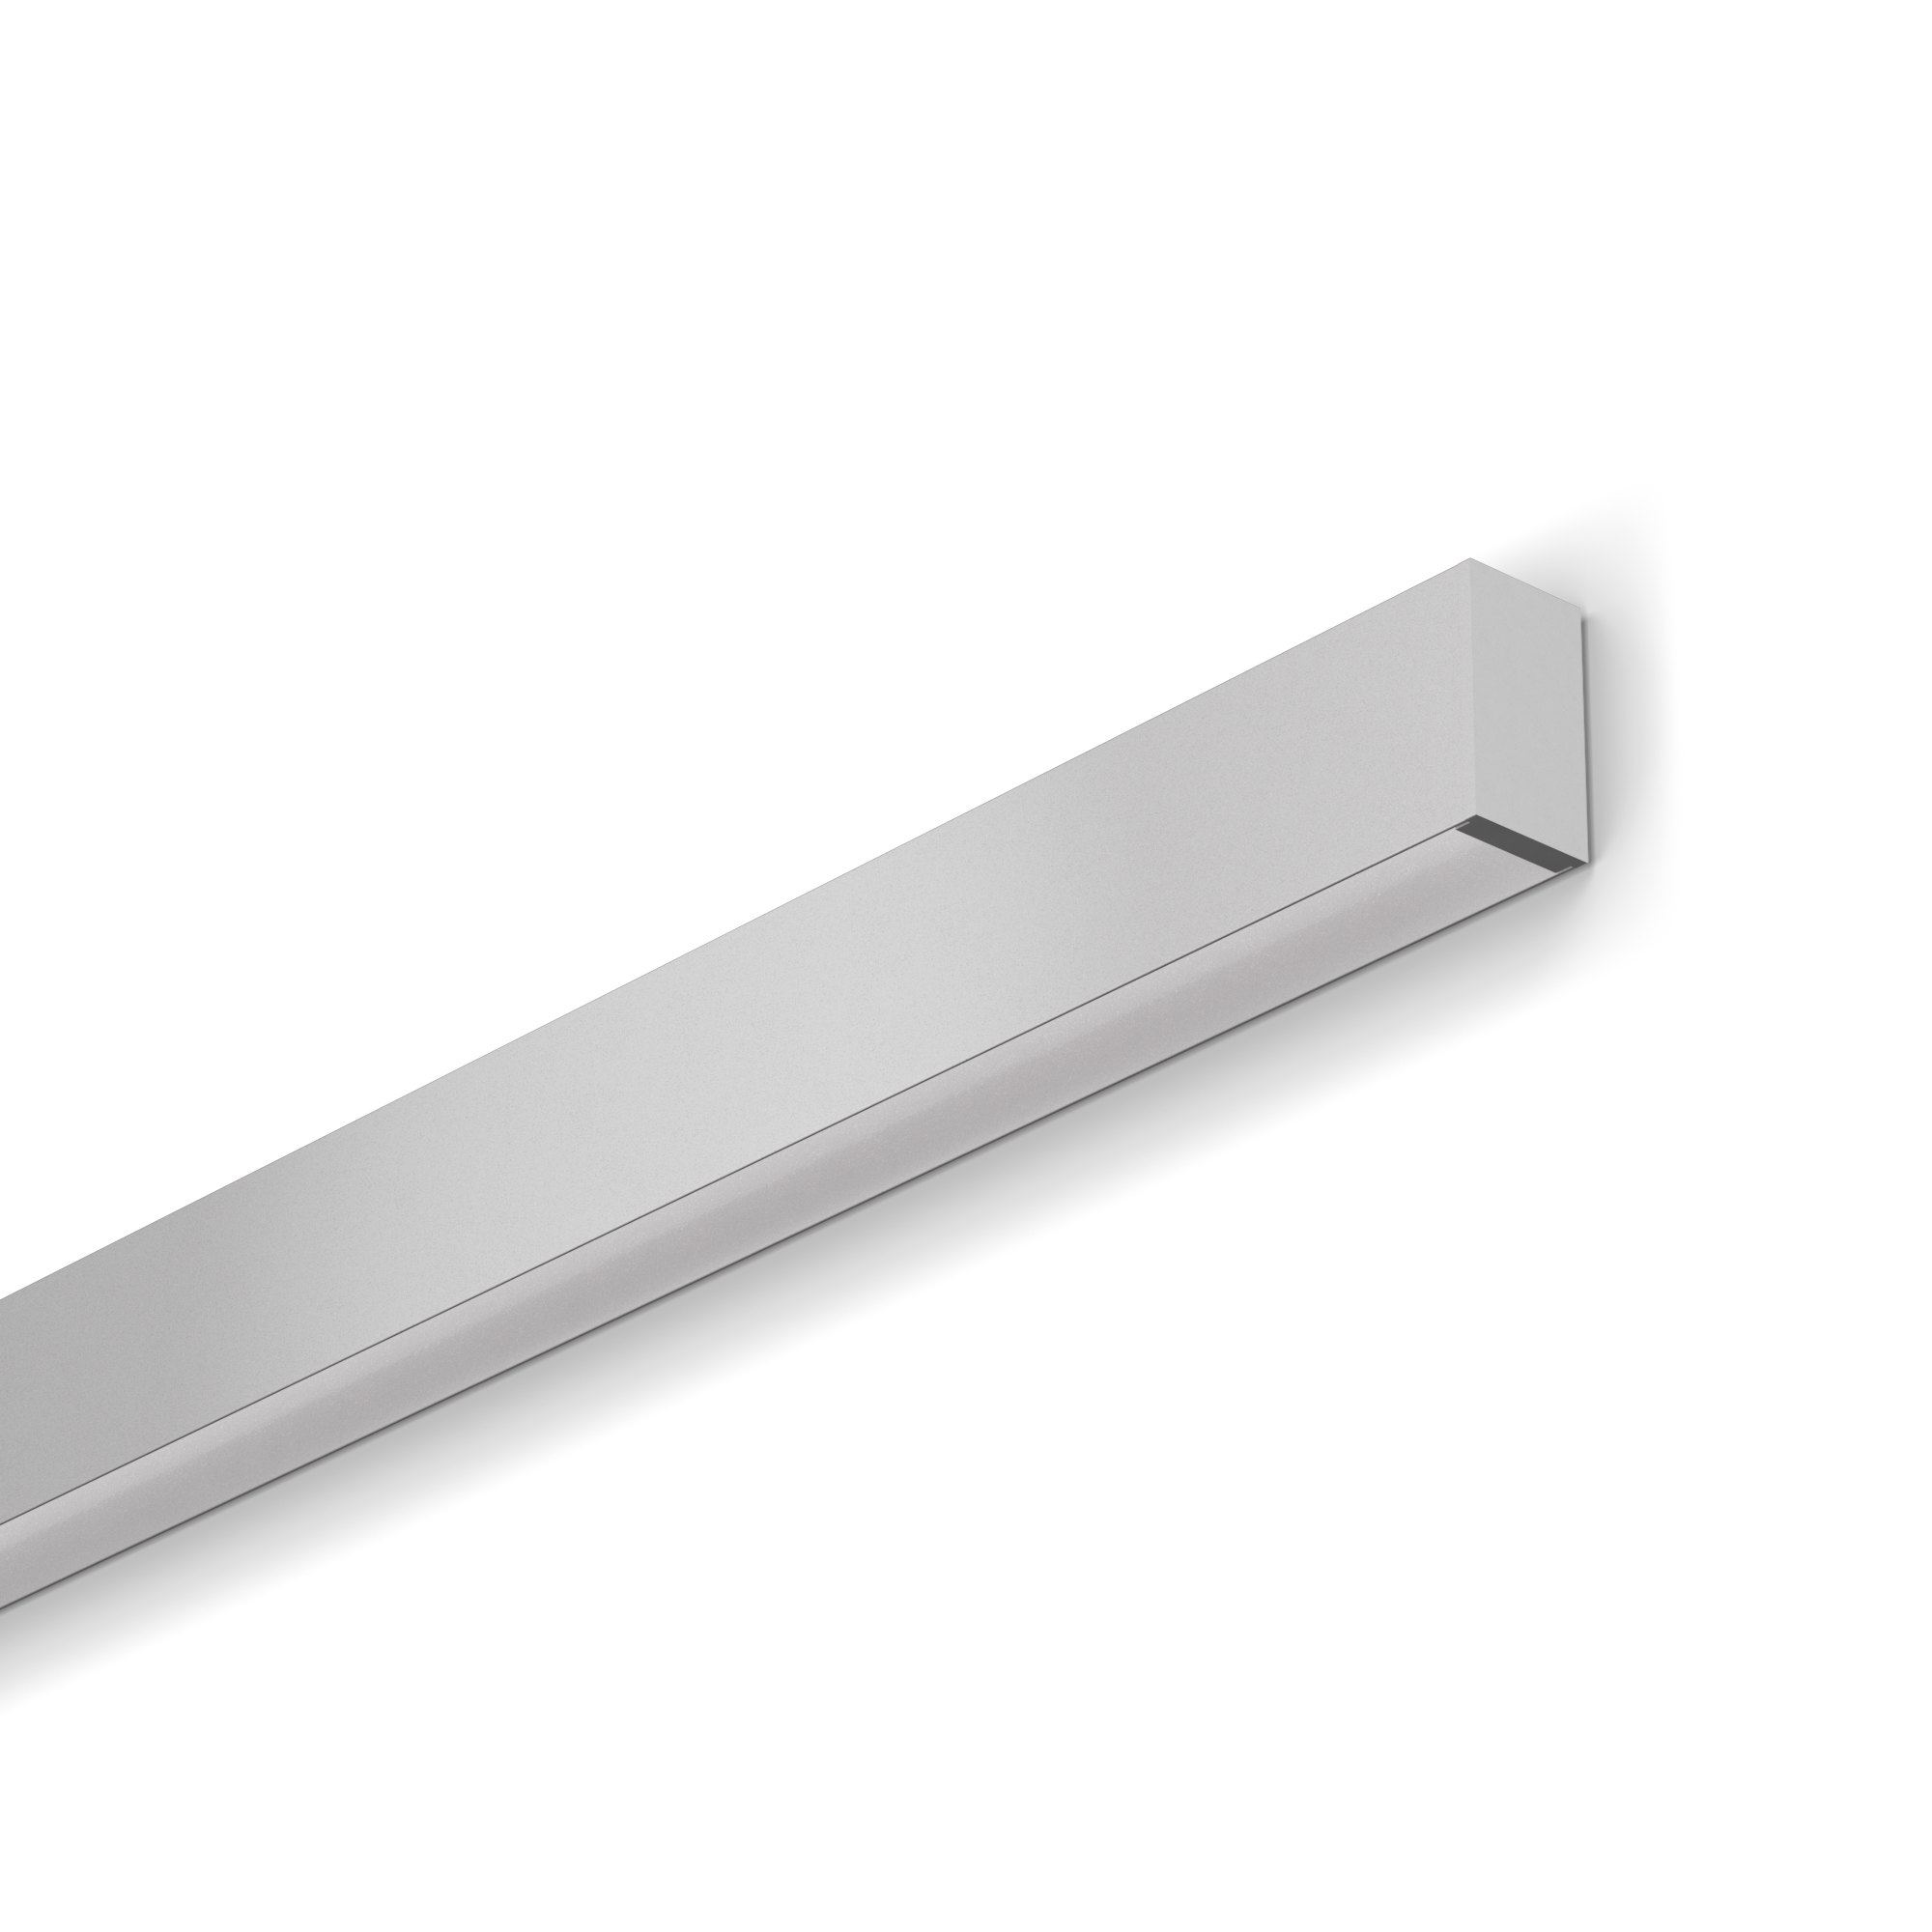 0.95” Ultra-Compact LED Linear
NANOBeam is 0.95” wide, bringing regressed SmartBeam® capabilities to a wall-mounted form factor that complements architectural space. NANOBeam features a remote driver to remove visual bulk.

 

Beam profile: 0.95” (24mm) x 1.73” (44mm)